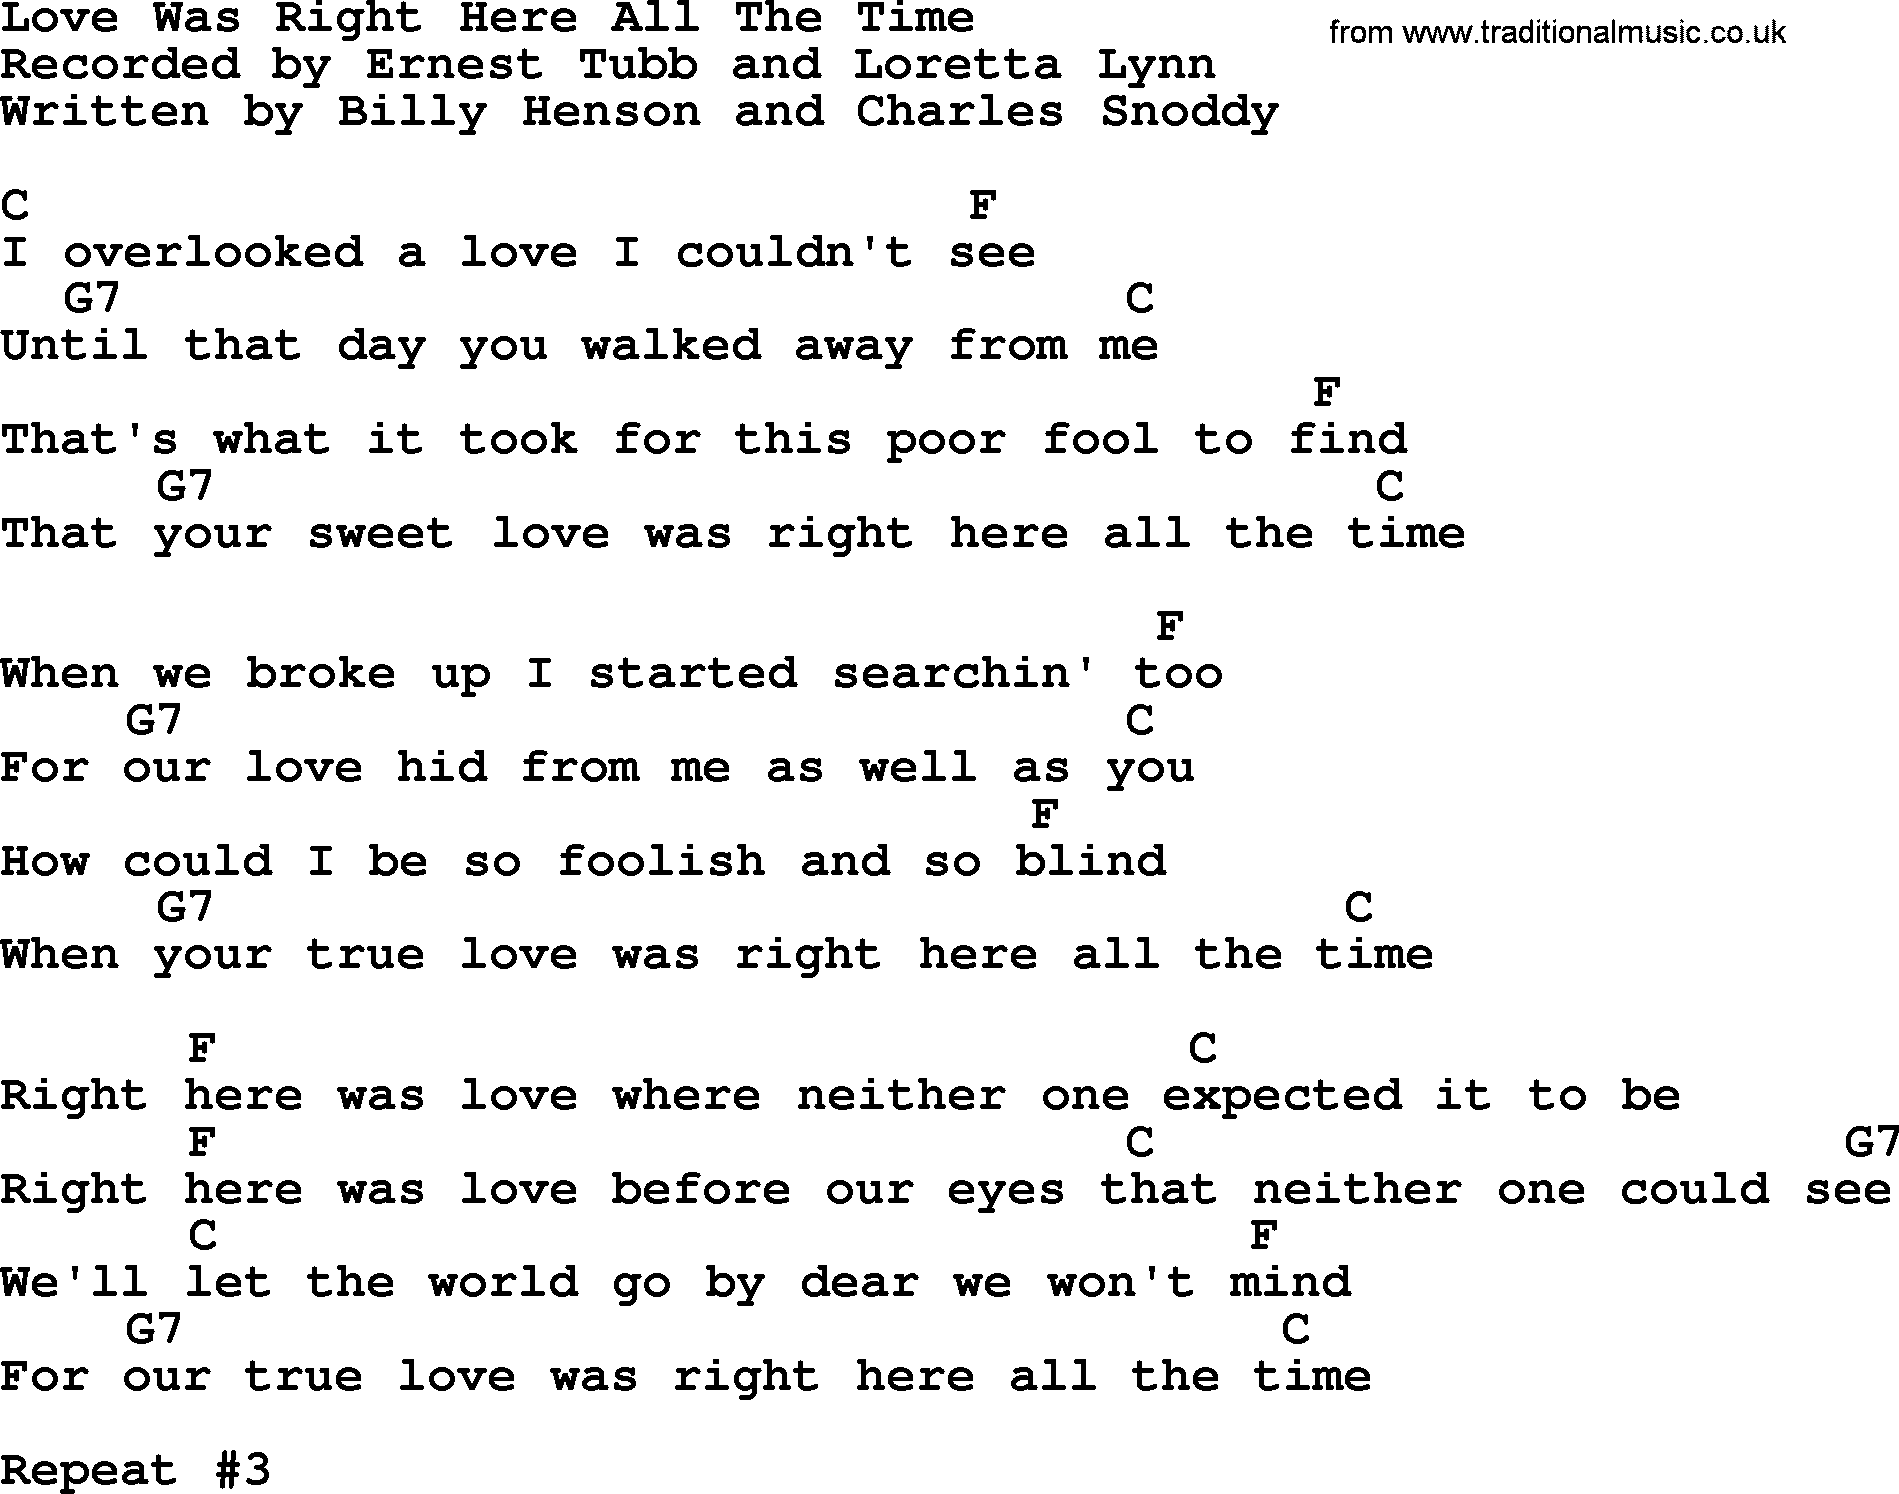 Loretta Lynn song: Love Was Right Here All The Time lyrics and chords